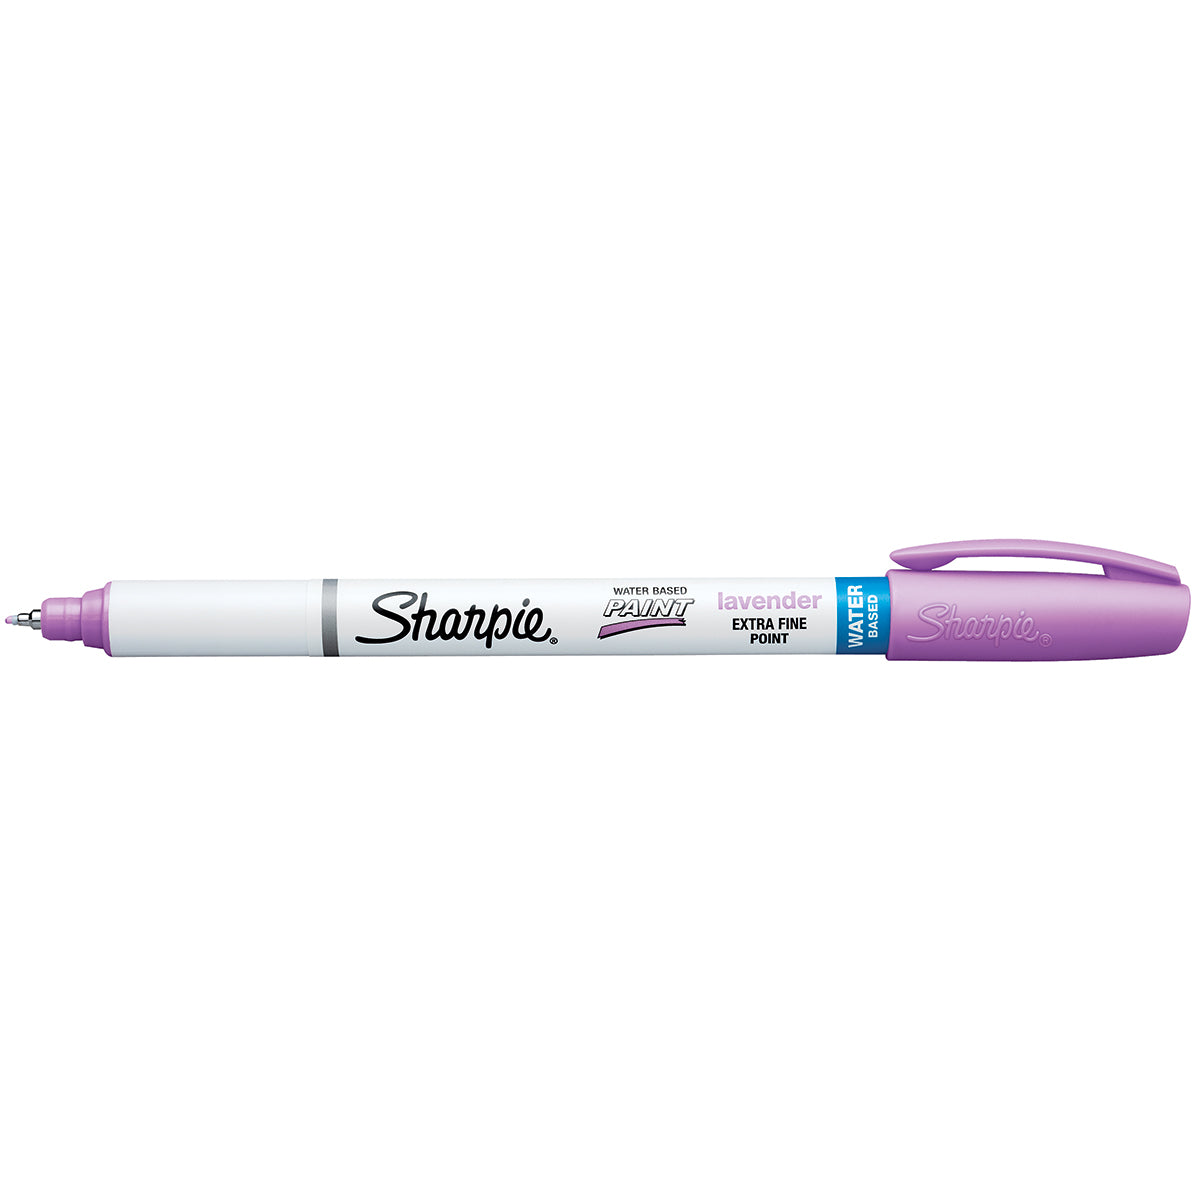 Sharpie Water-Based Paint Markers